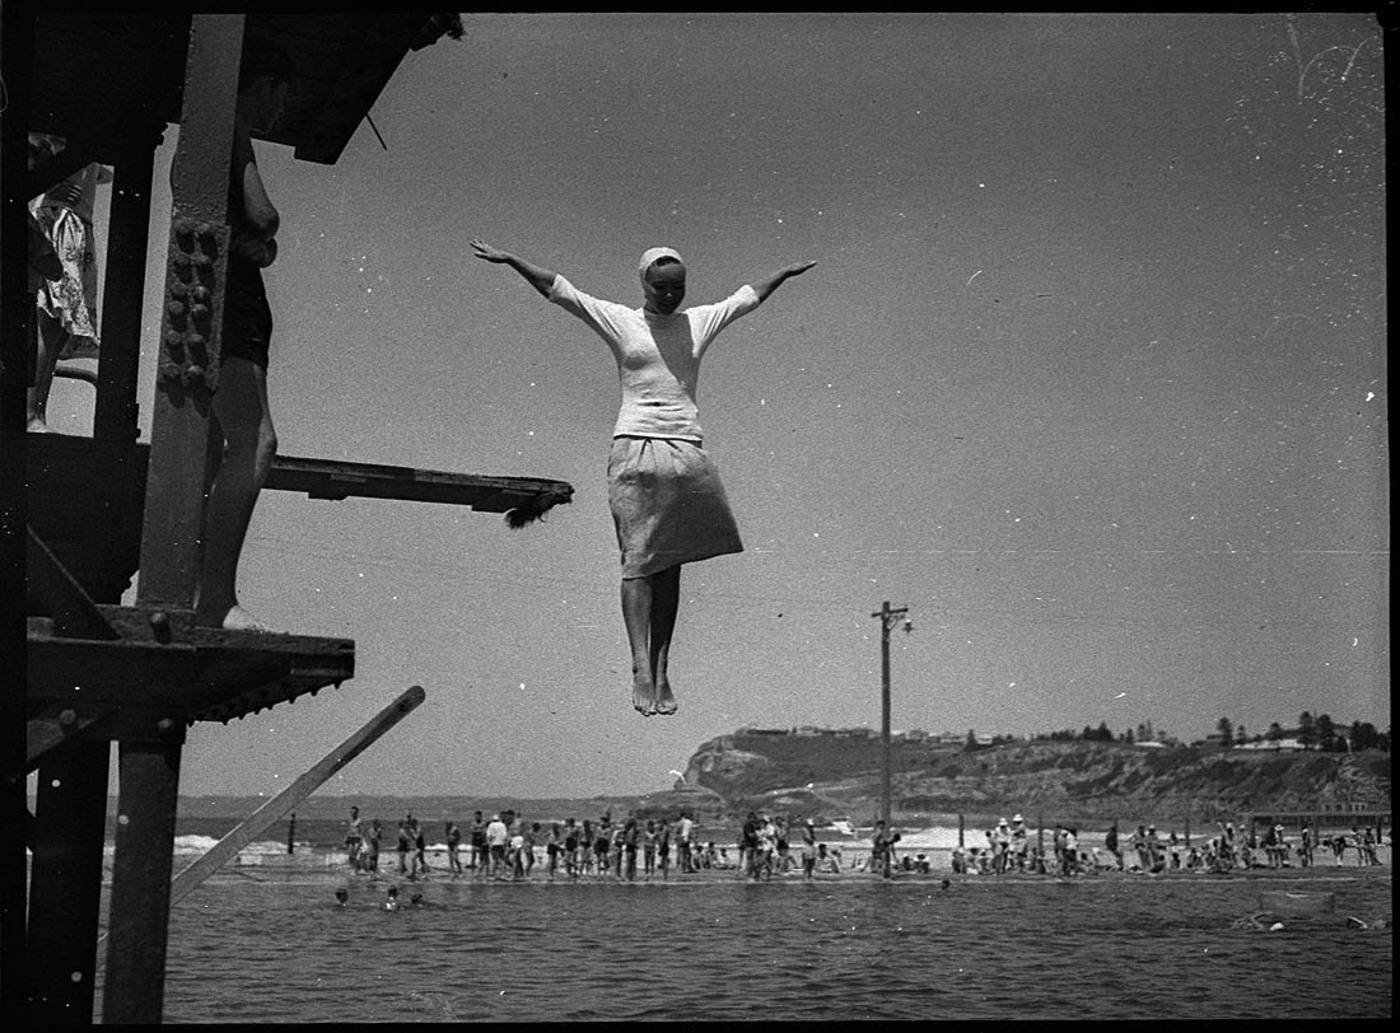 A woman jumps in the water in Newcastle, Australia in 1937.